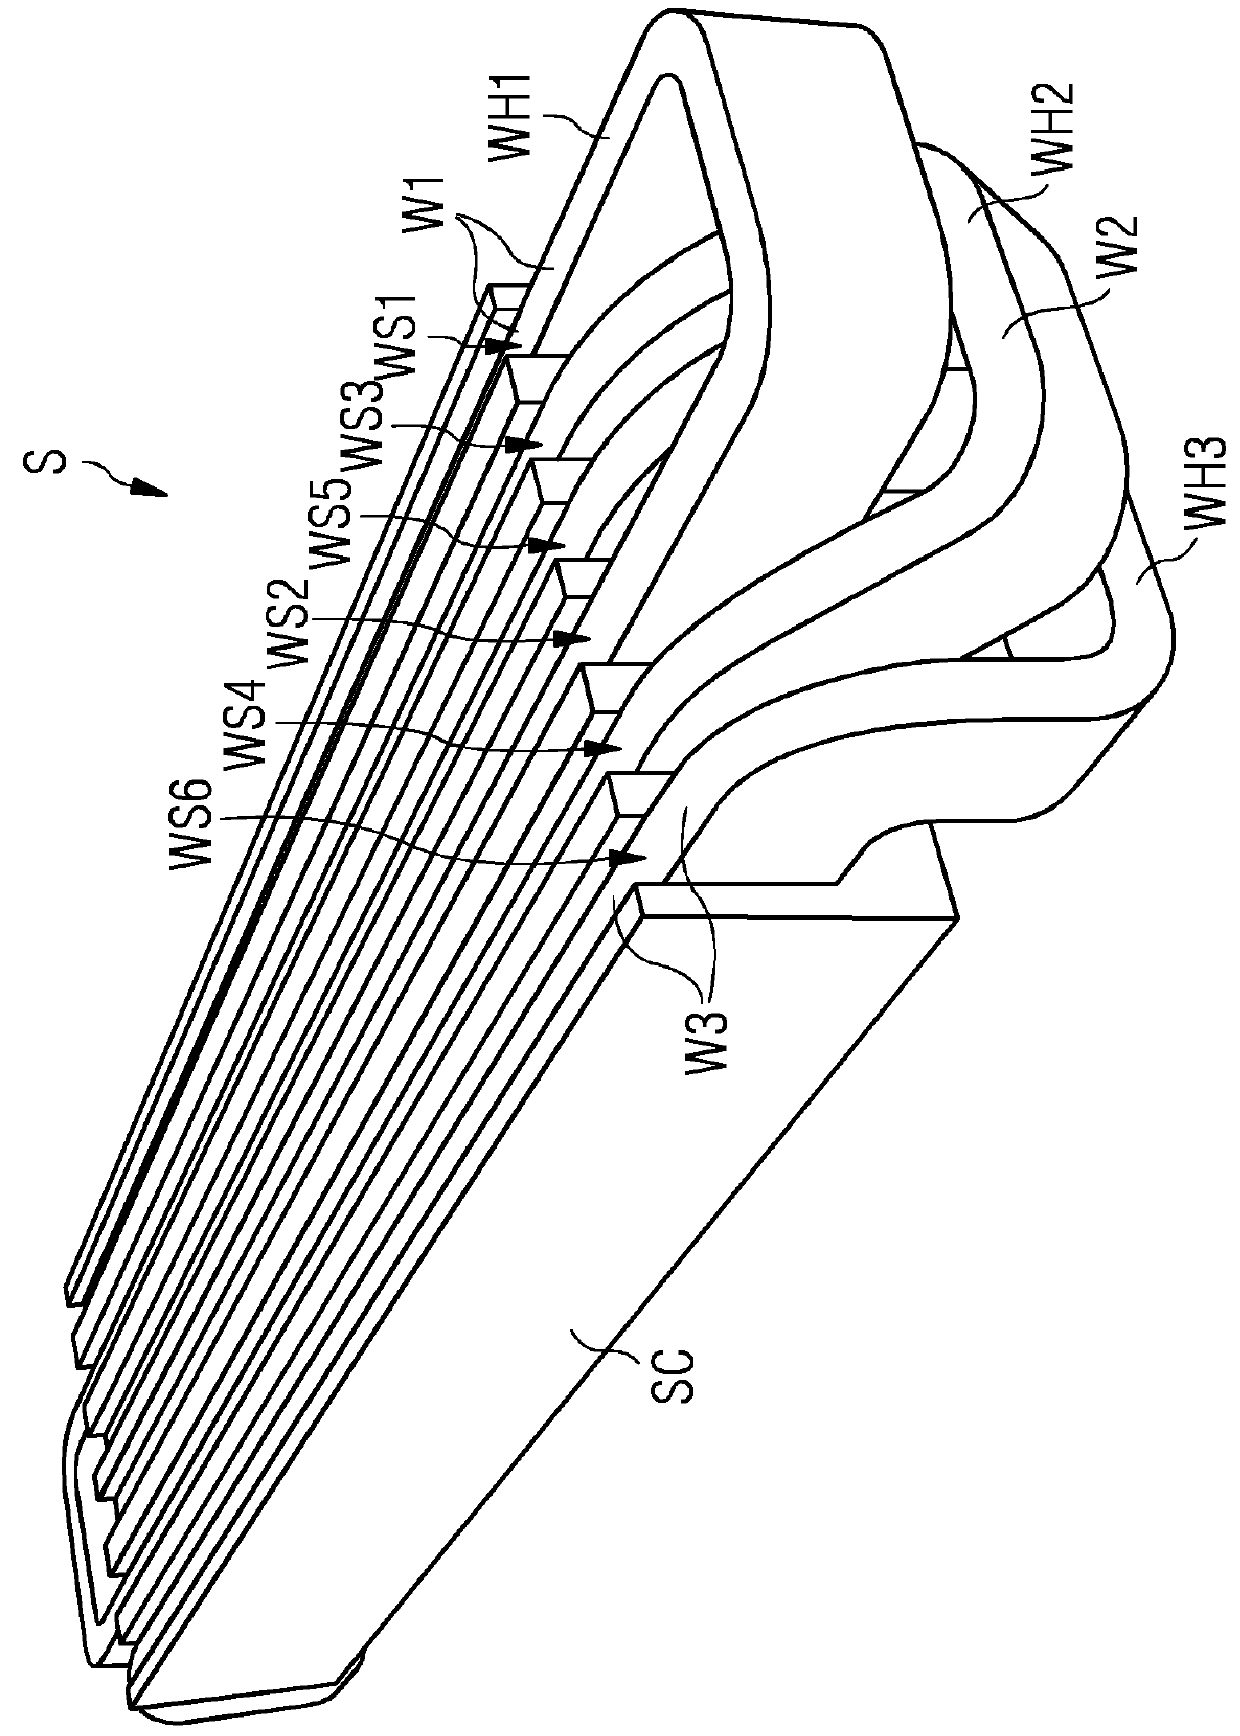 Group of three stator windings for a stator of an electric machine, a stator arrangement, a generator, and wind turbine